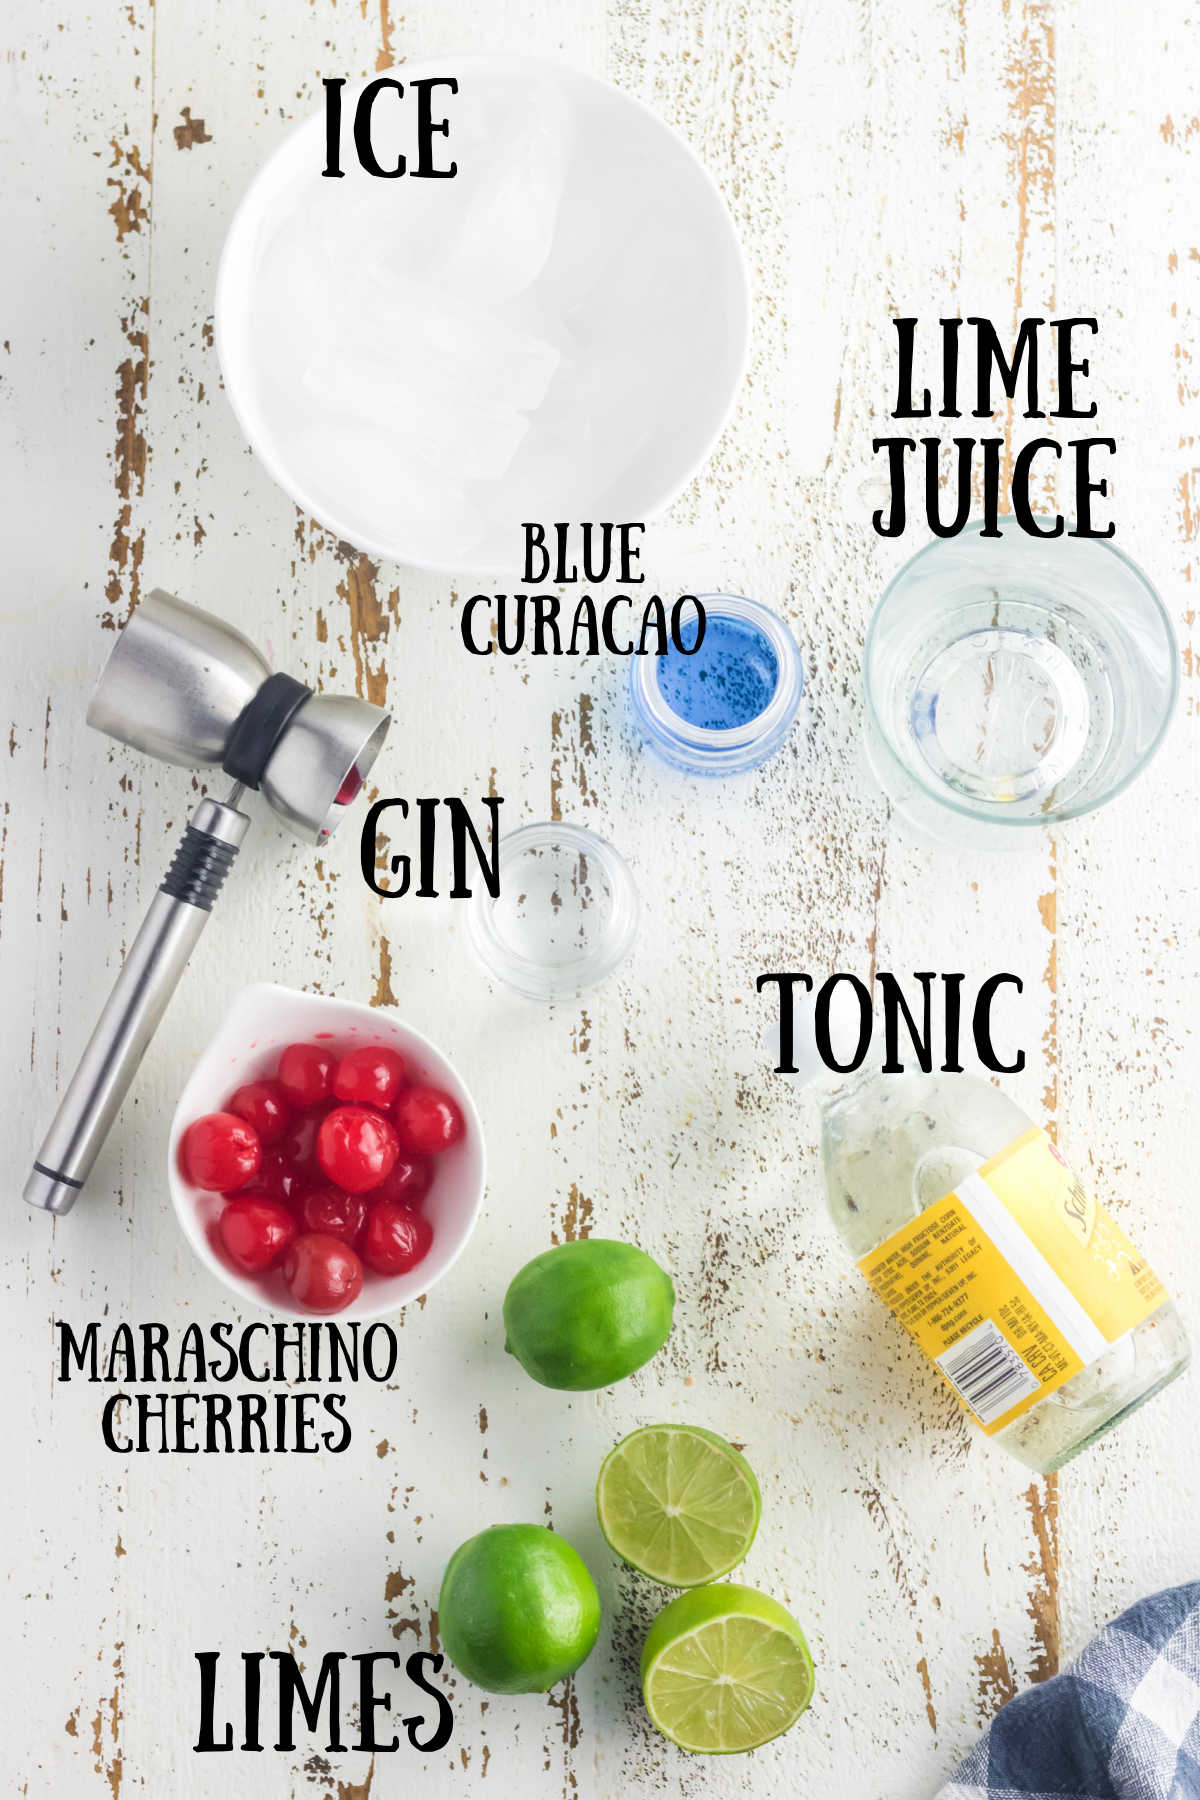 Ingredients for Gin and Tonic